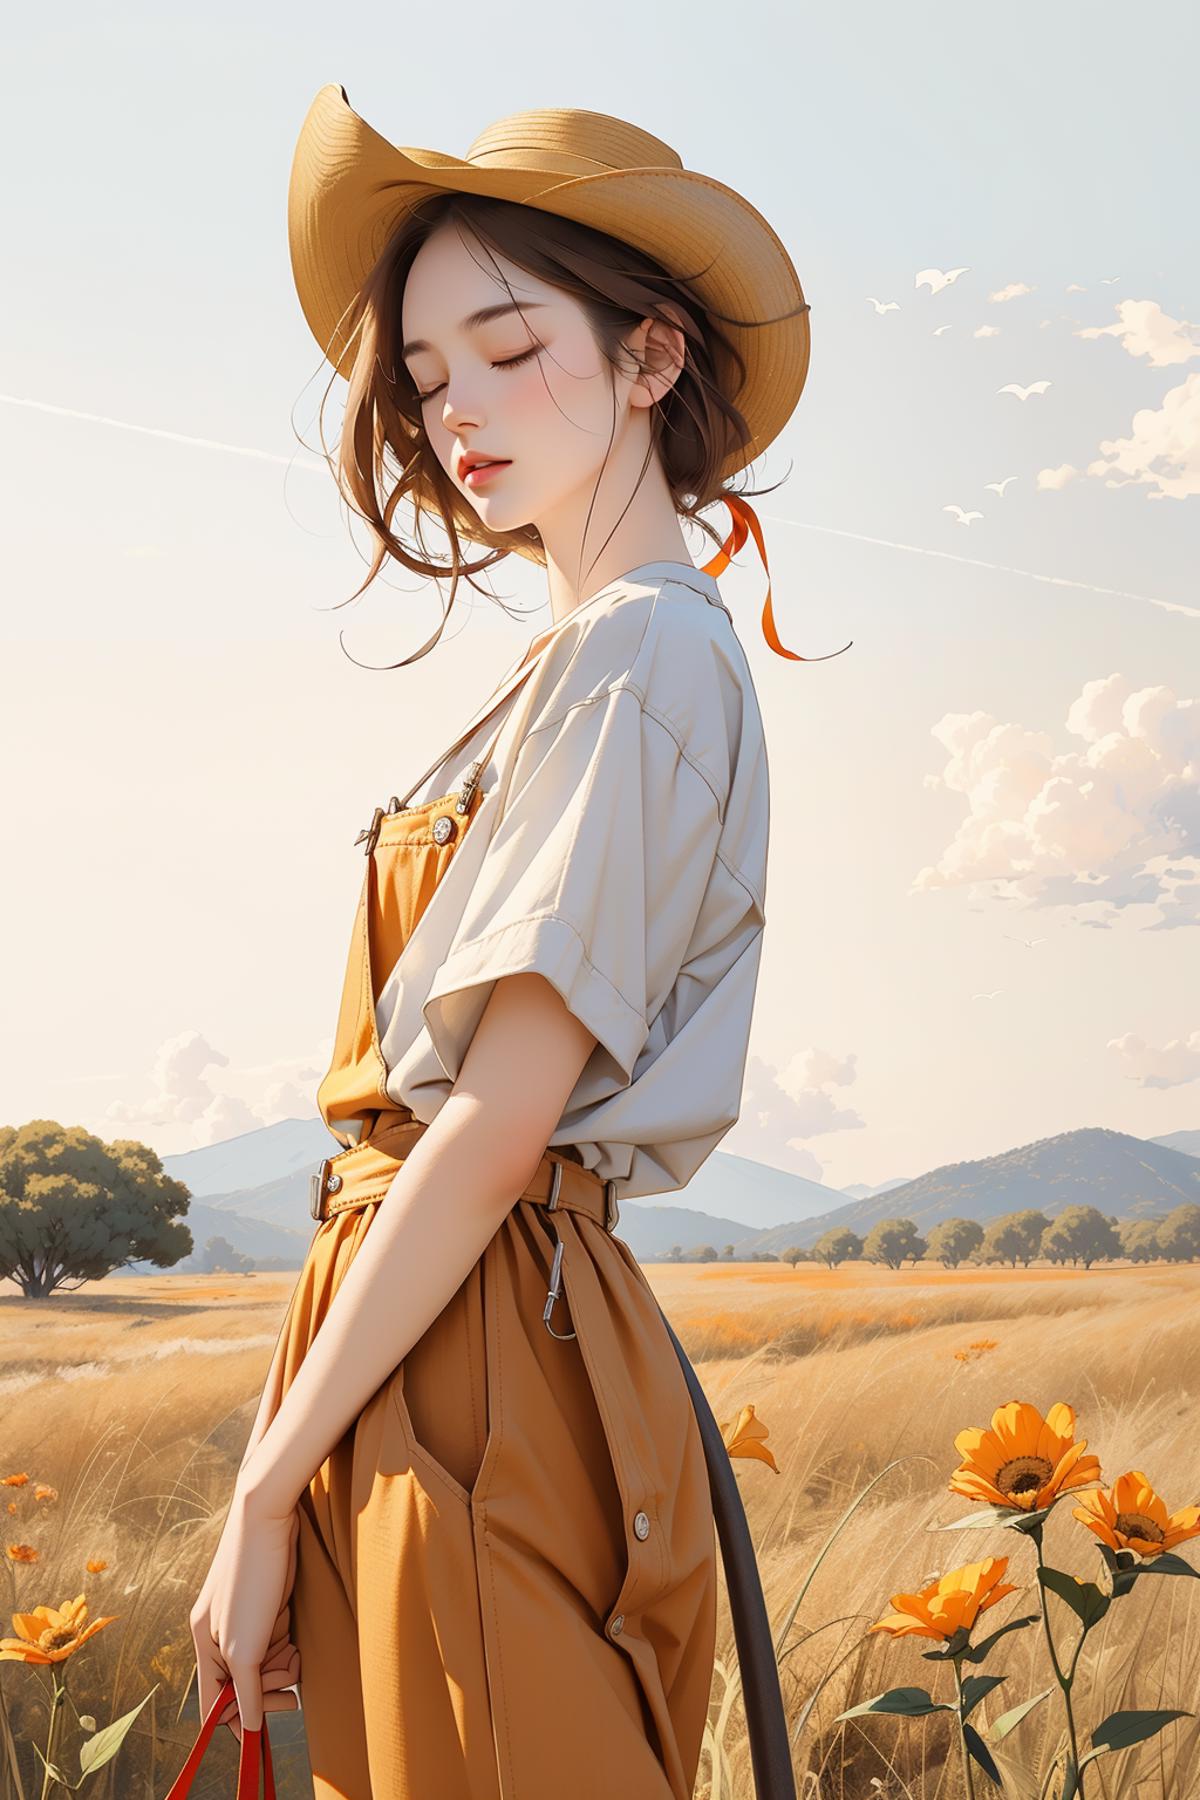 A woman in a field with a ponytail, wearing an orange dress and white shirt.